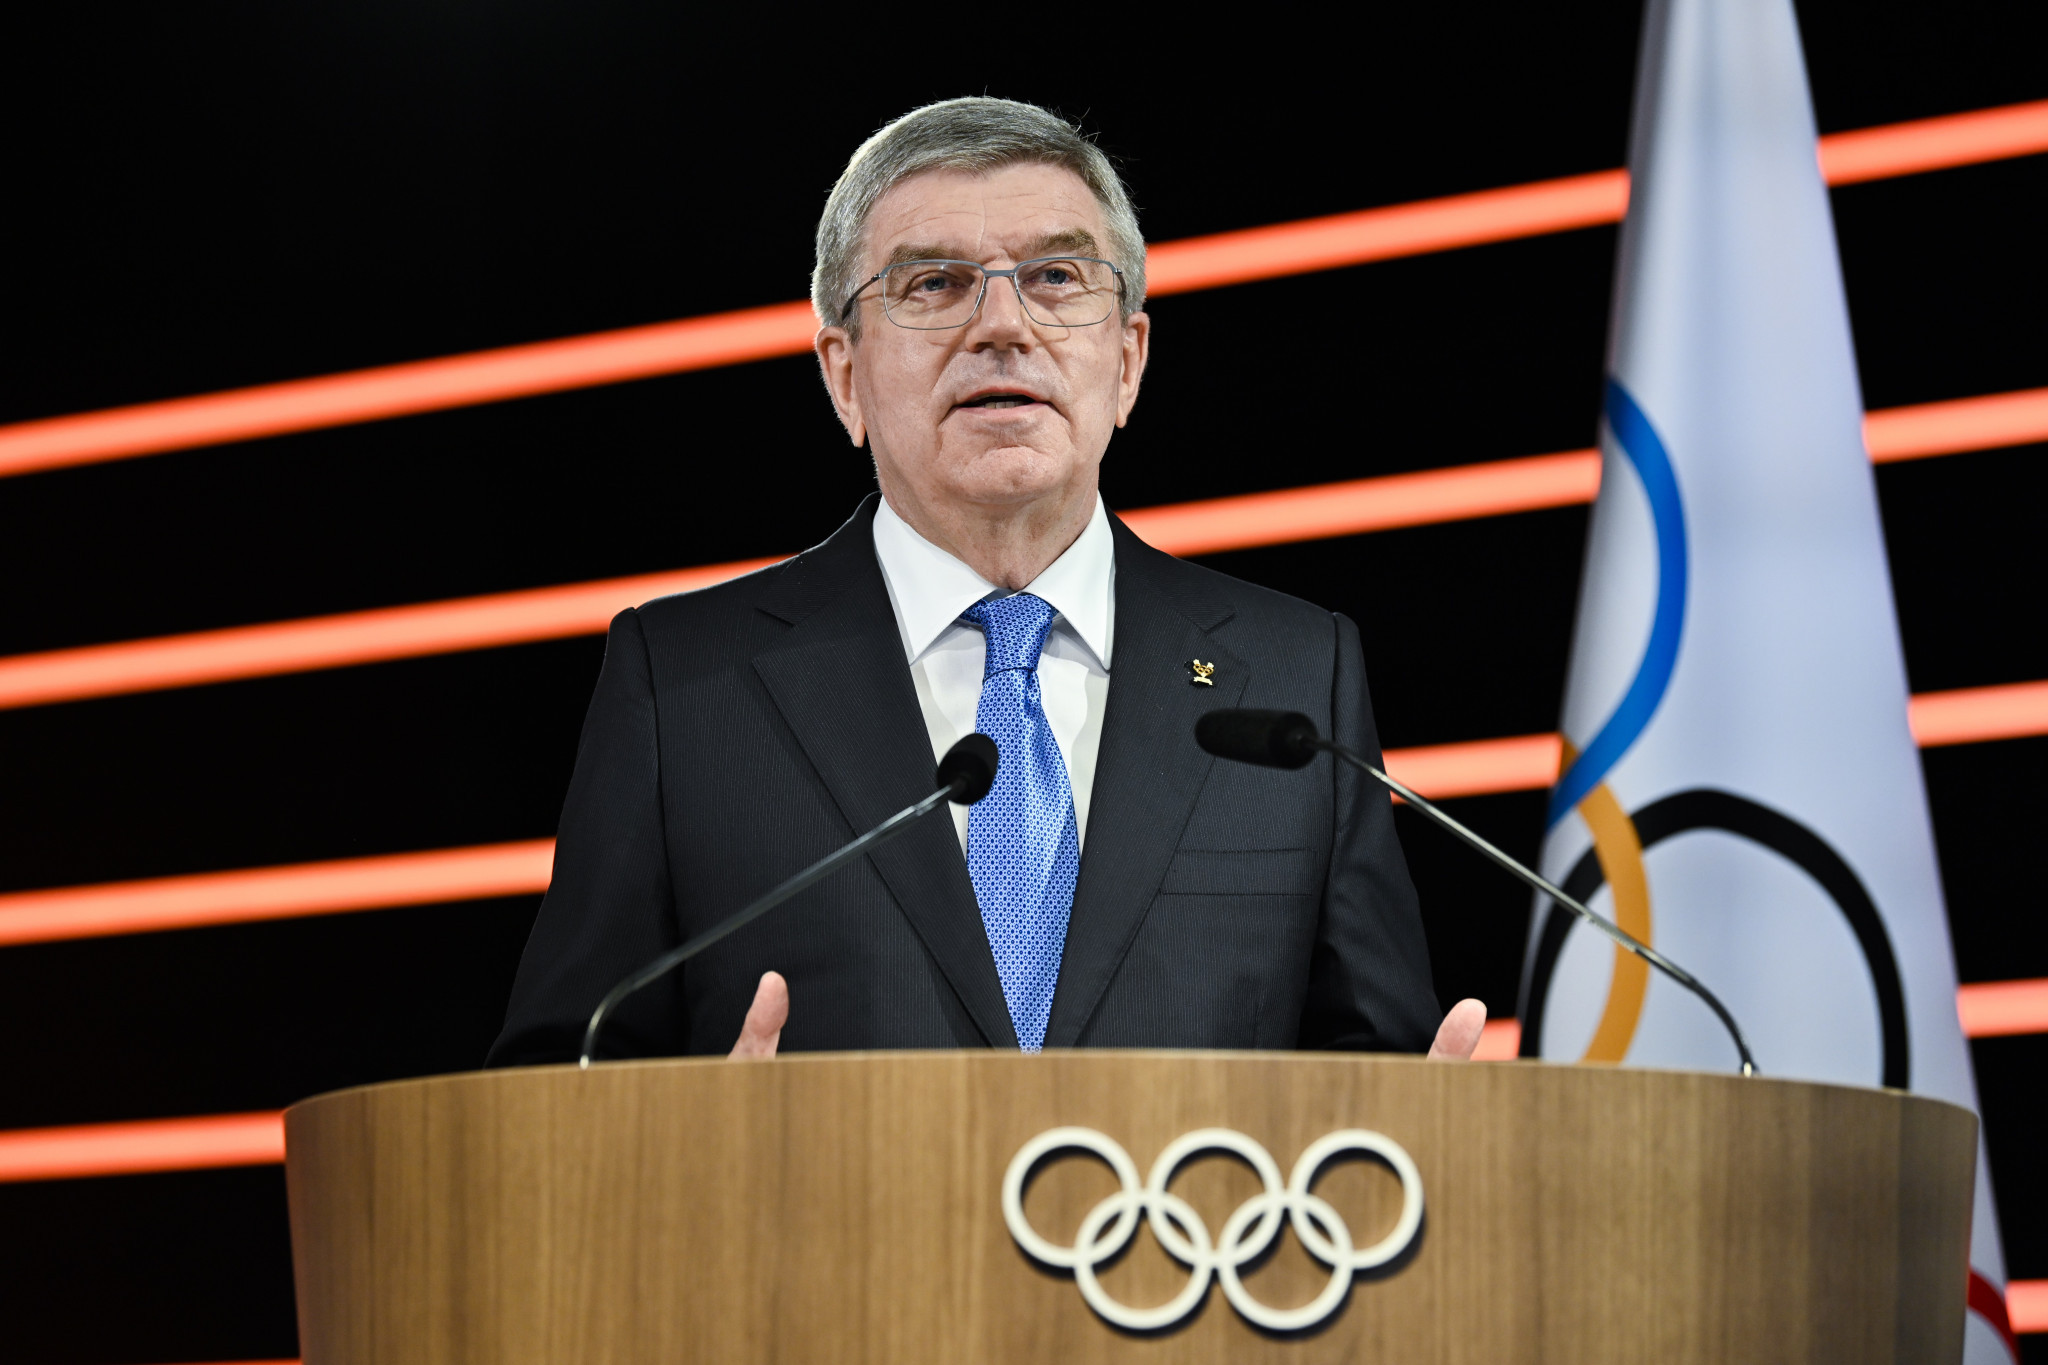 IOC President Thomas Bach insists International Federations' decisions on transgender participation must be based on scientific evidence ©Getty Images